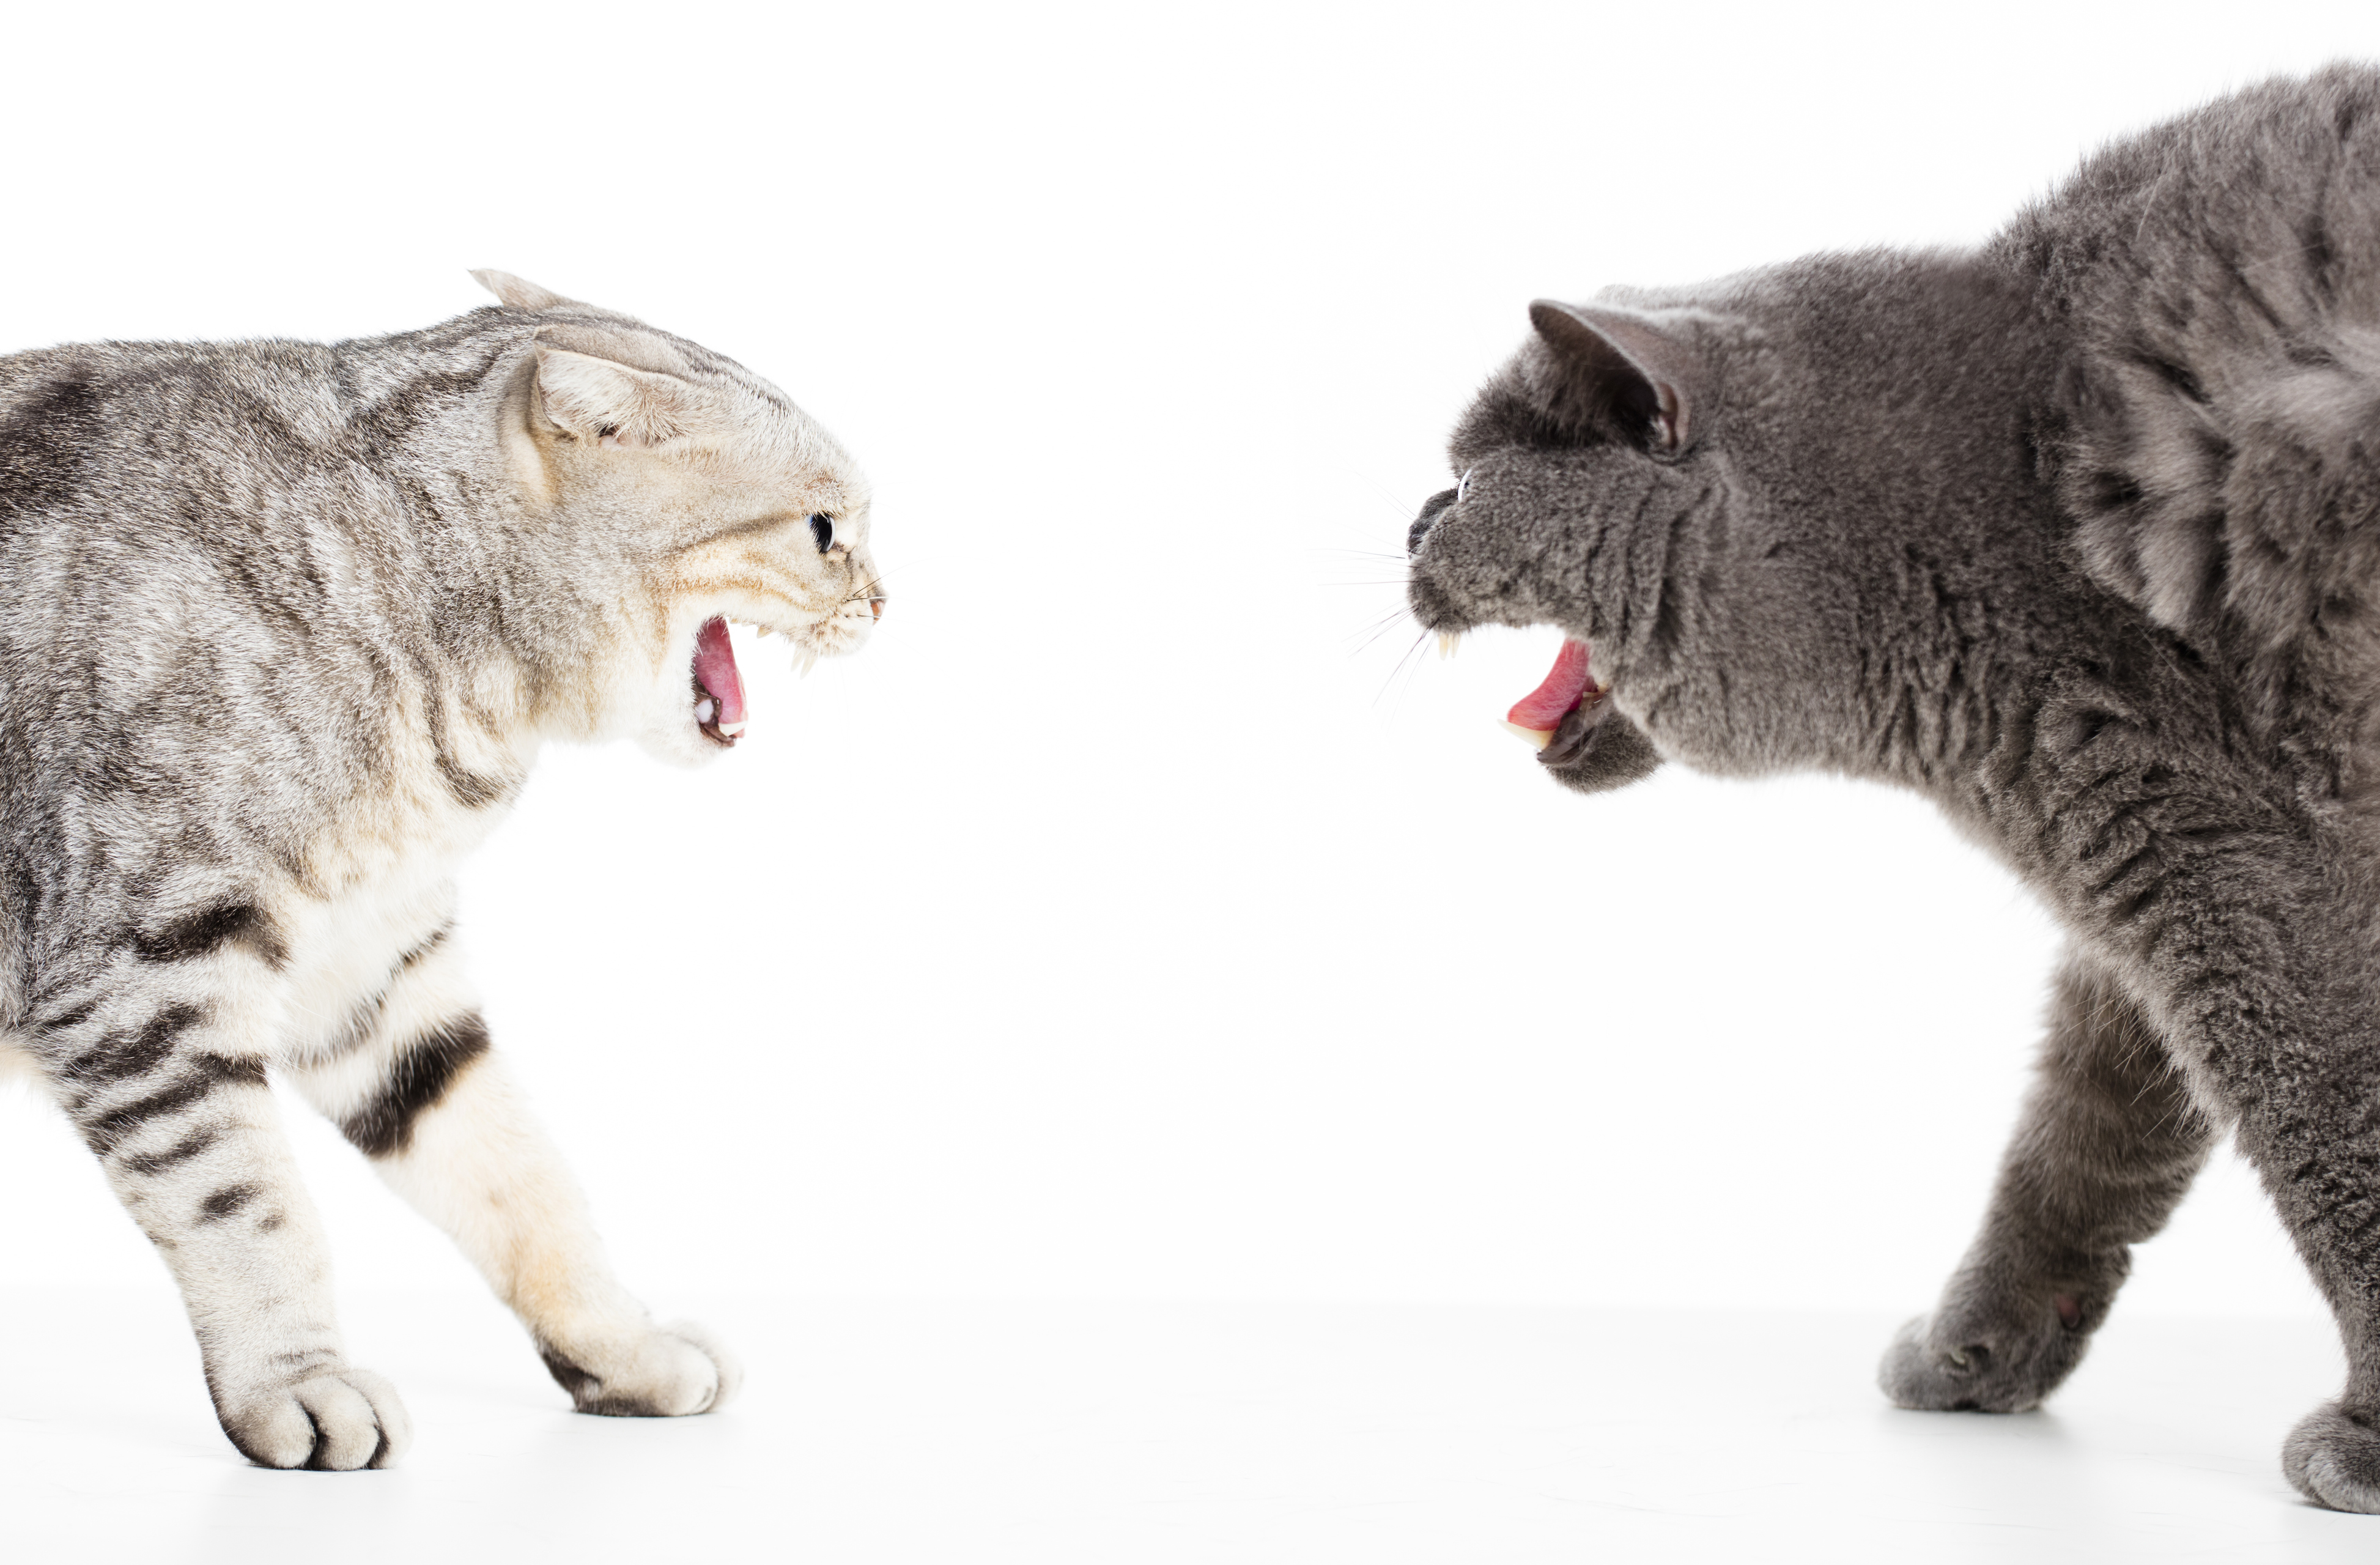 two cats in a conflict and isolated on white&quot;n